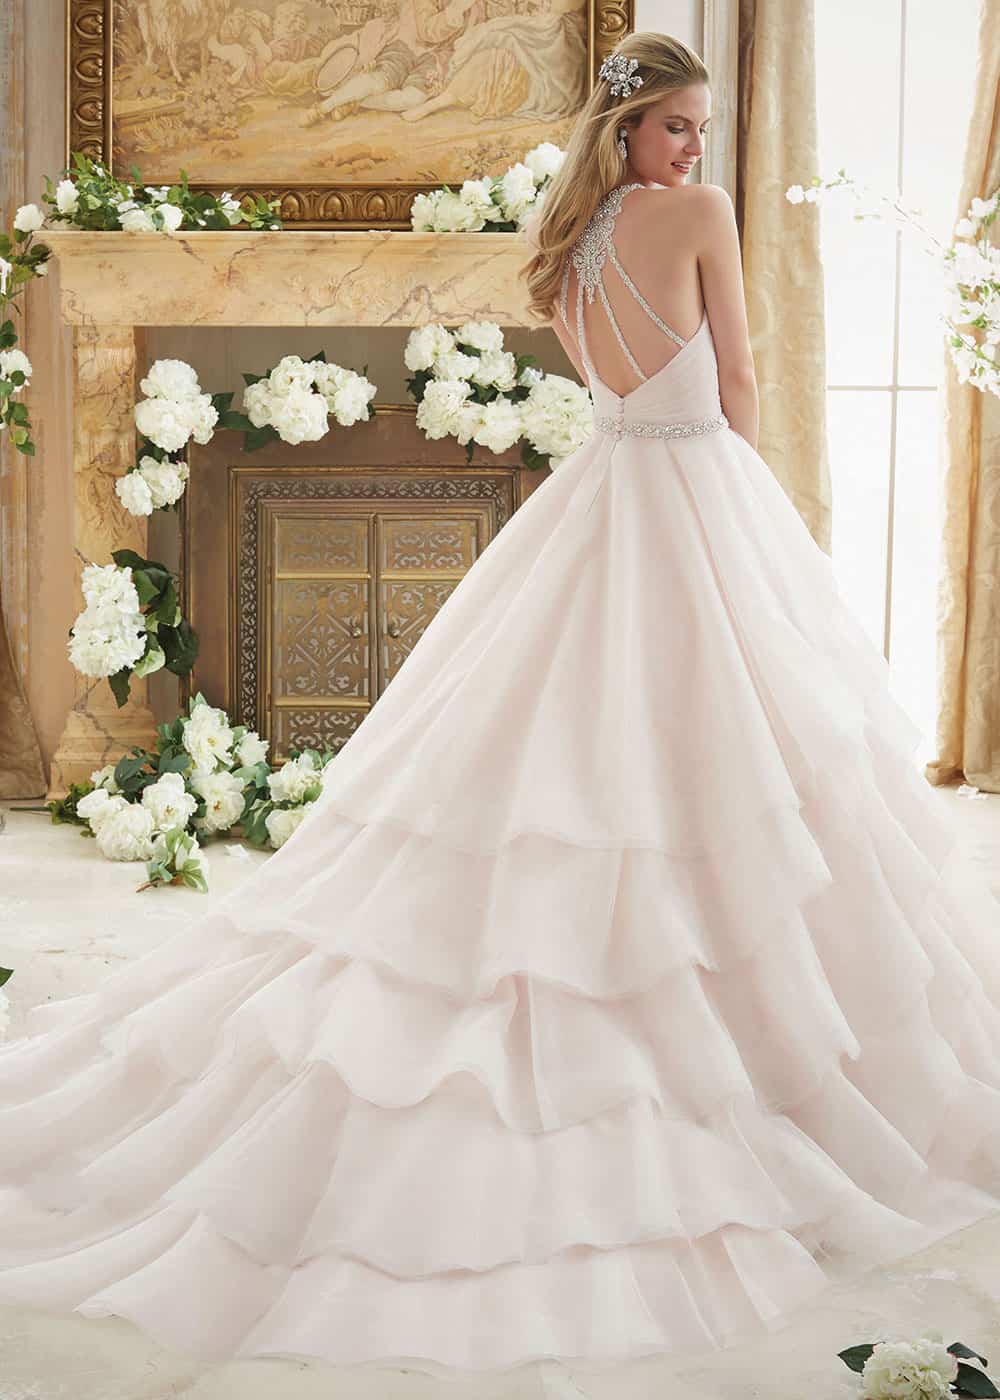 Wedding gown from White Lily Couture.